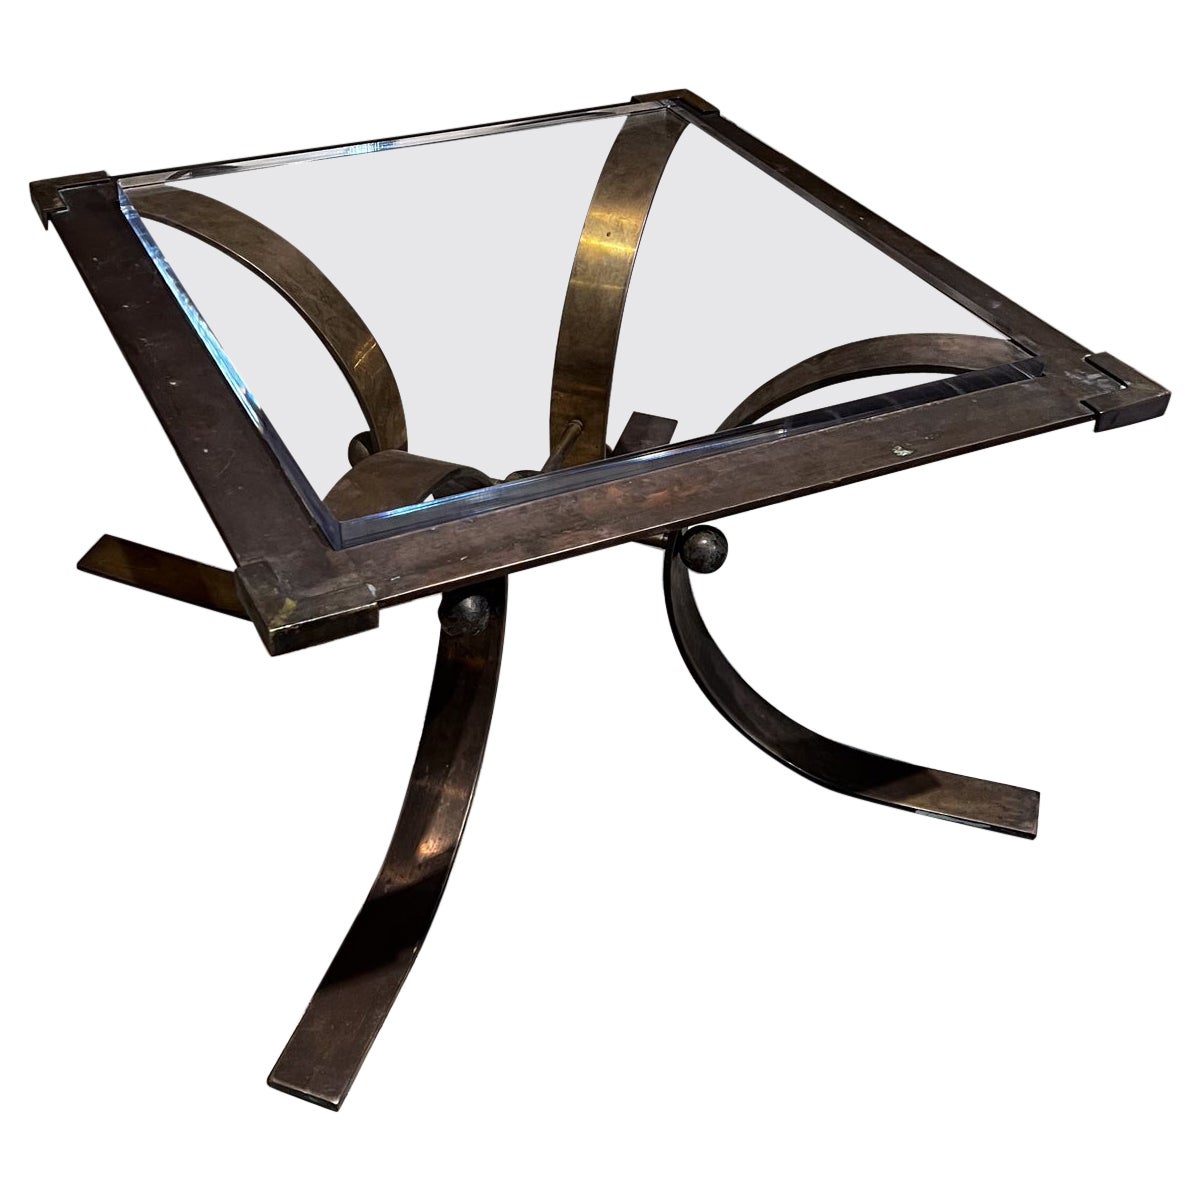 1950s Arturo Pani Sculptural Side Table in Patinated Brass Mexico City For Sale